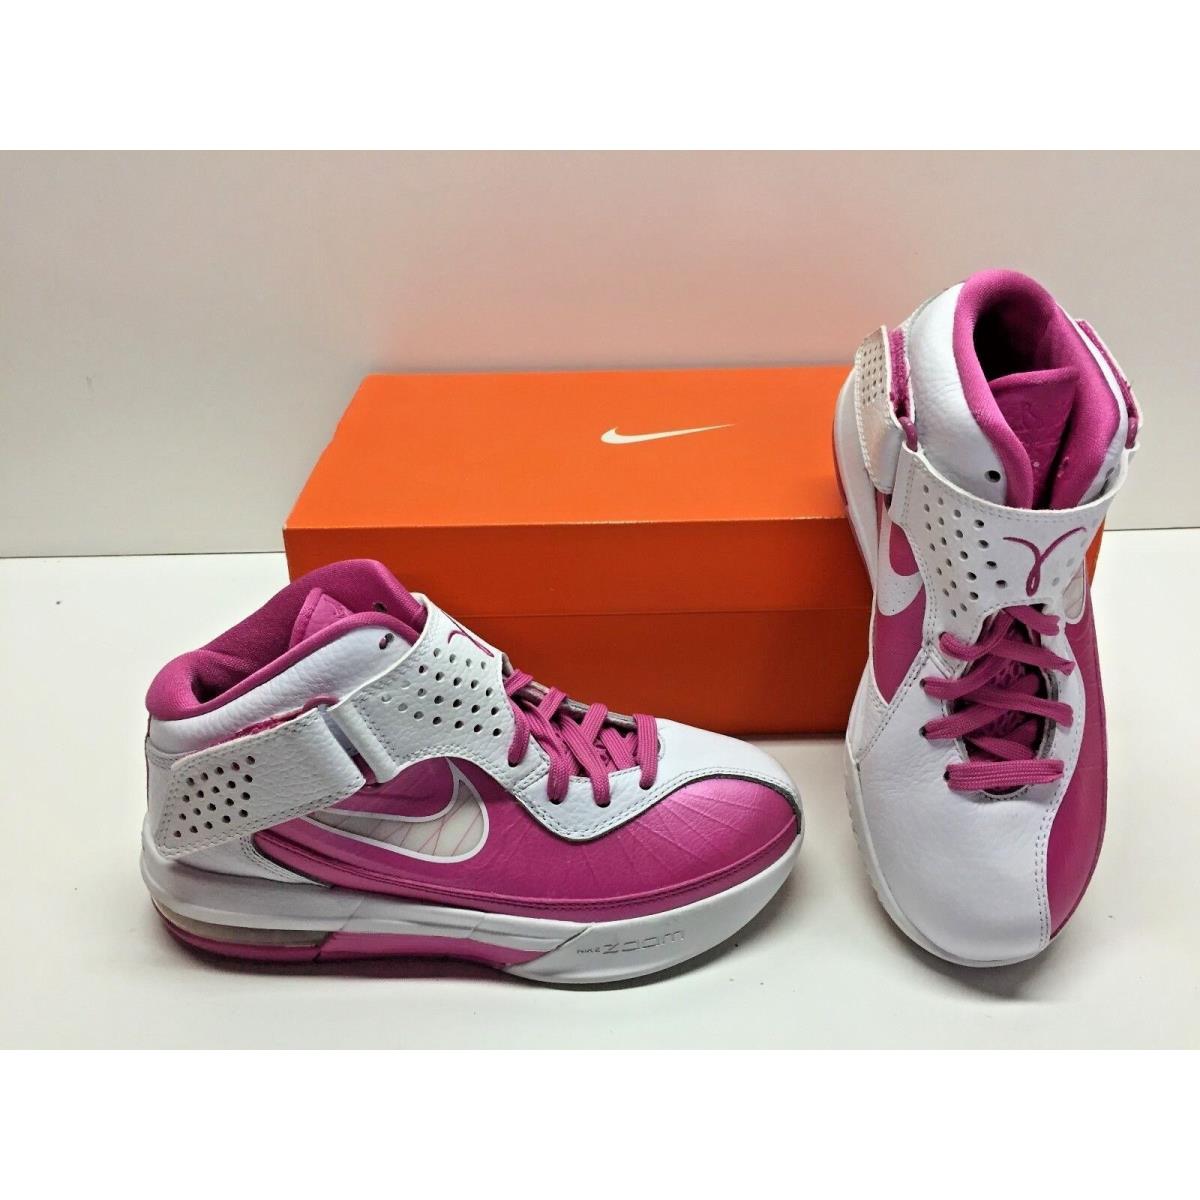 Nike Air Max Soldier V 5 Lebron 454132 Breast Cancer Sneakers Shoes Womens 5